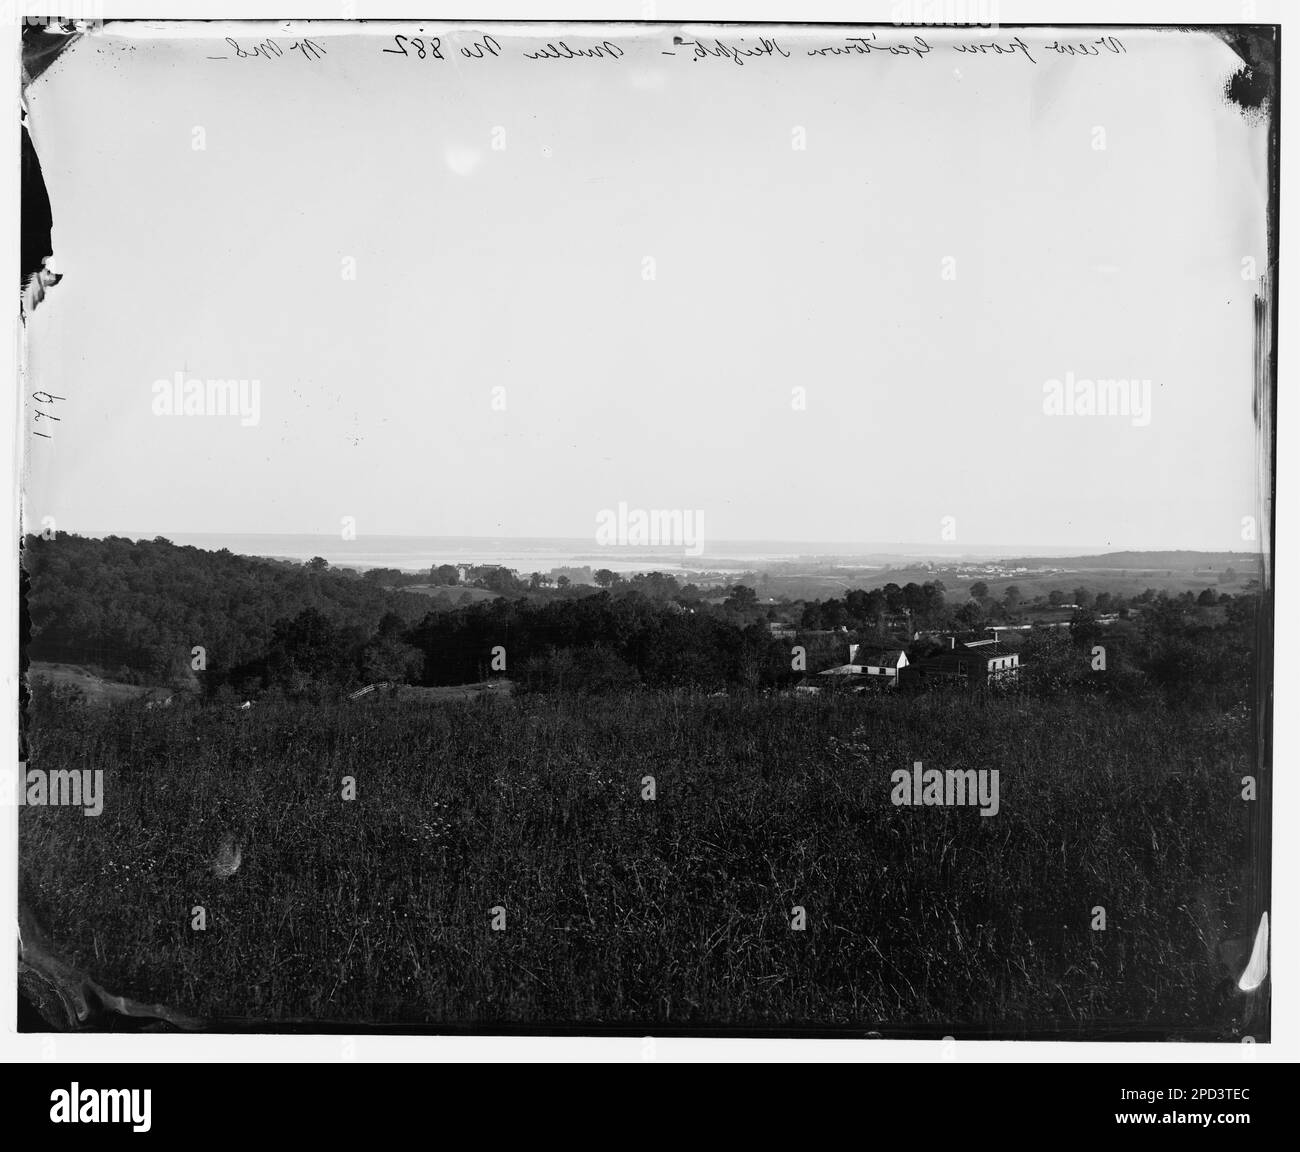 Washington, District of Columbia. View from Georgetown Heights. Civil war photographs, 1861-1865 . United States, History, Civil War, 1861-1865. Stock Photo